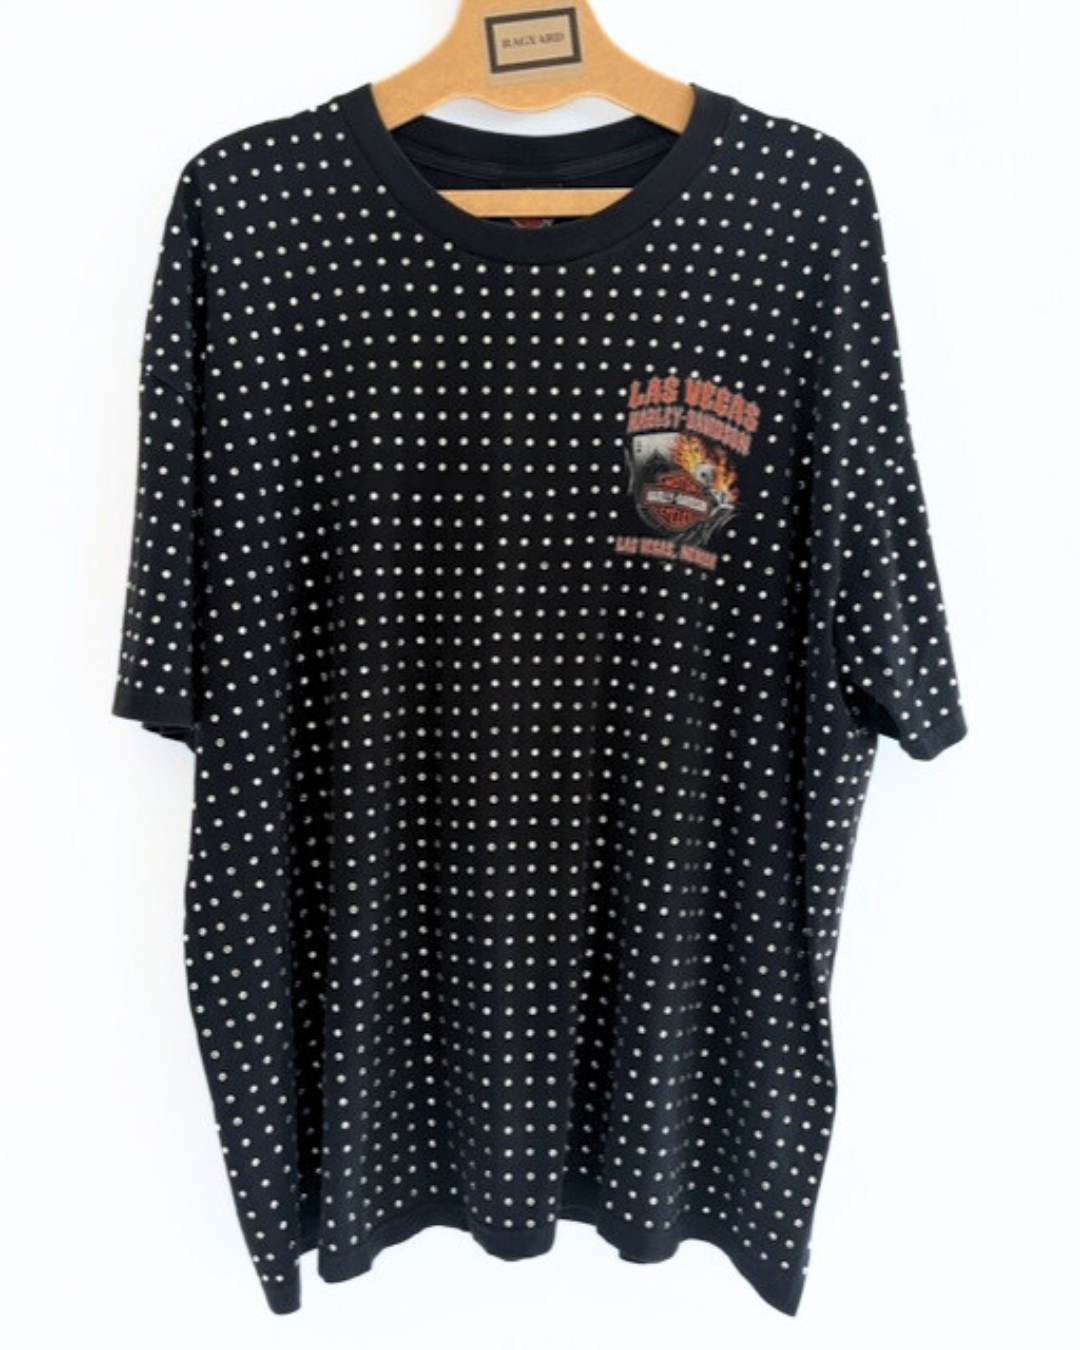 Vintage Black HARLEY DAVIDSON T-shirt with all over diamante studs